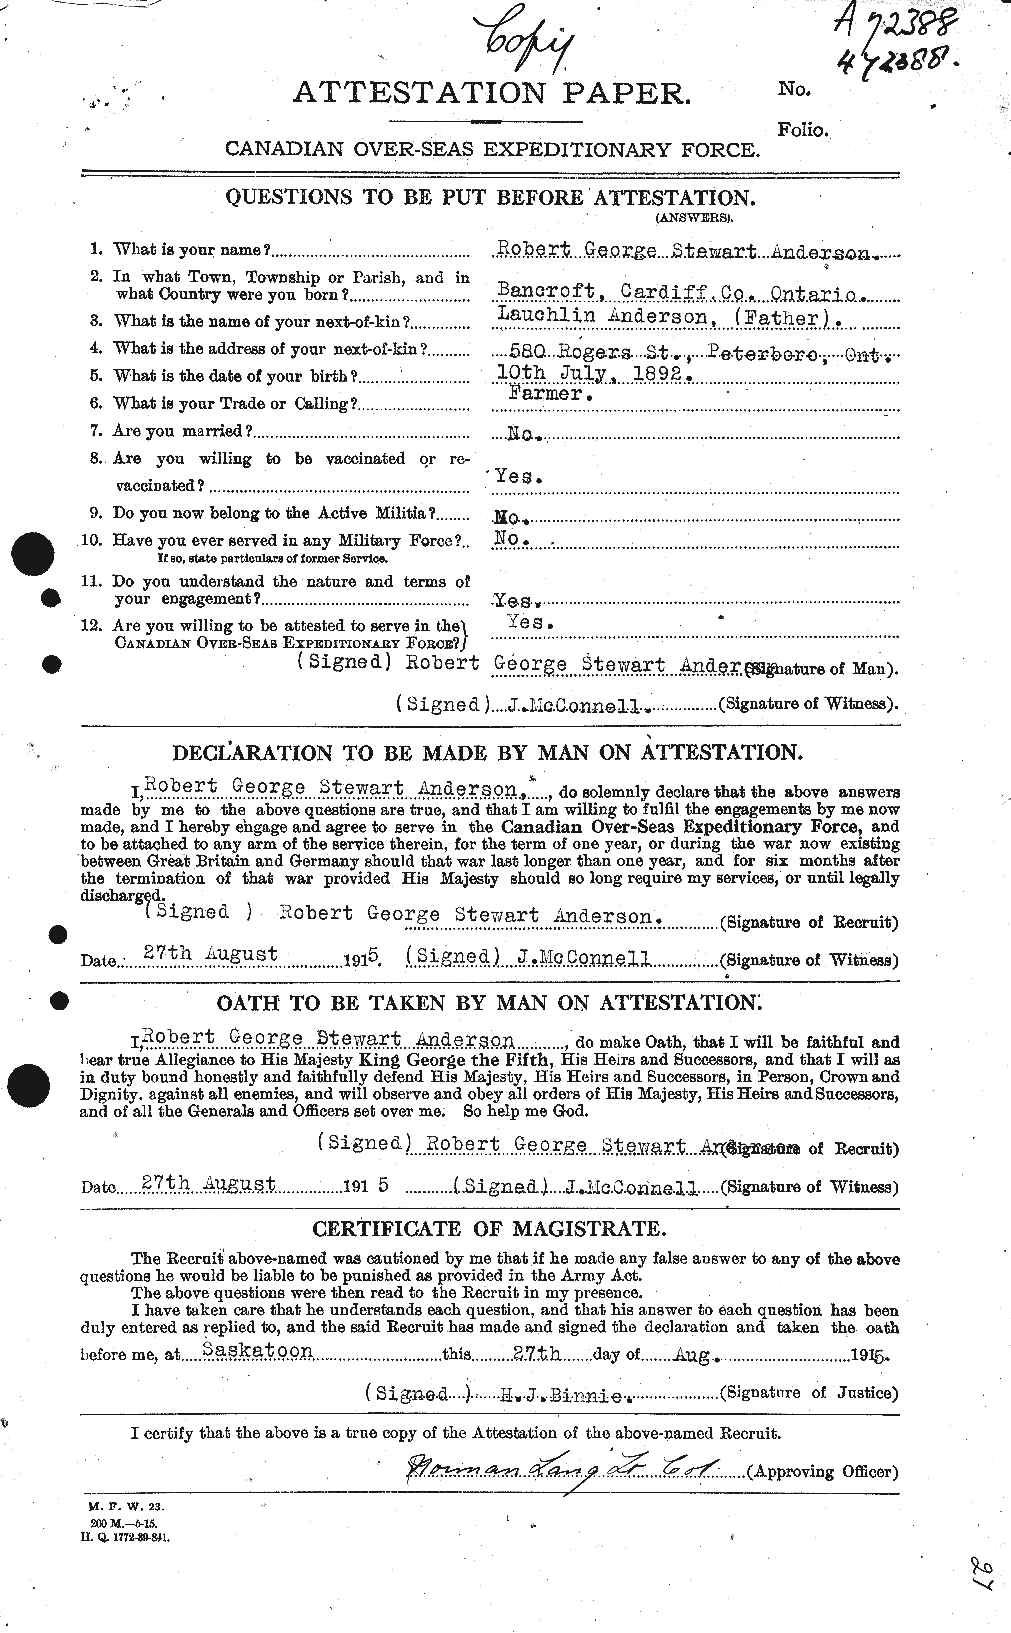 Personnel Records of the First World War - CEF 207253a